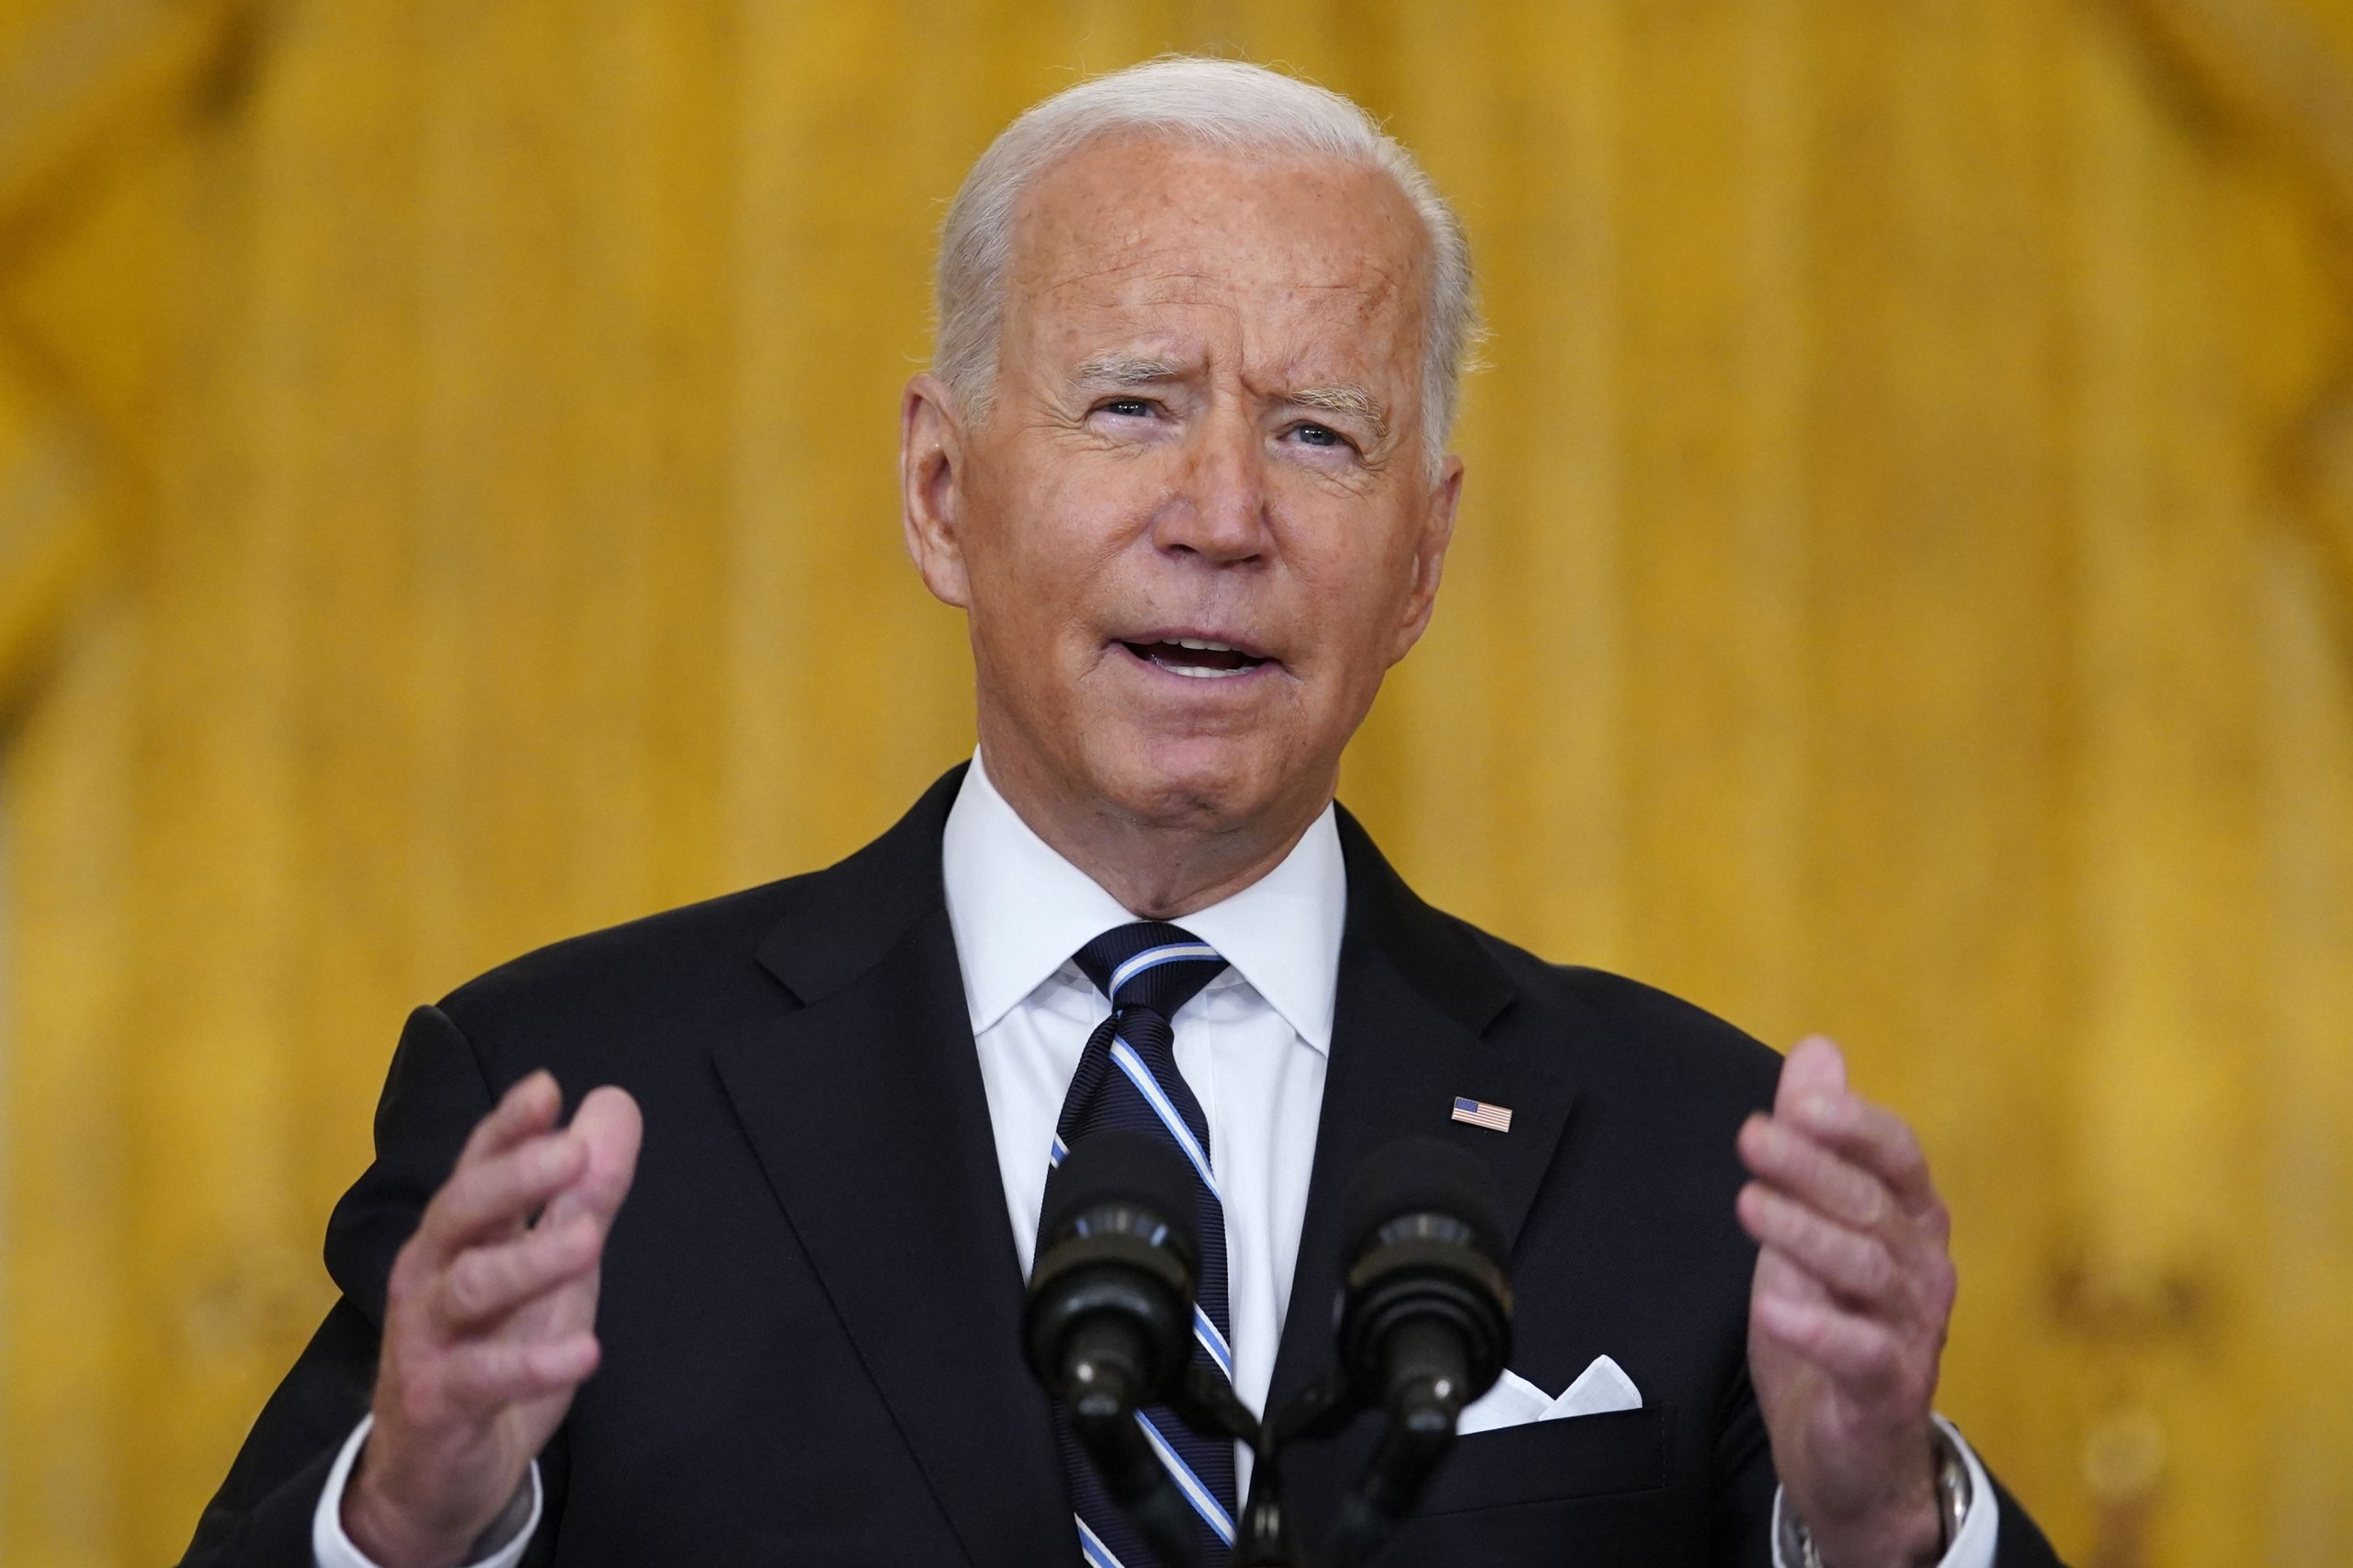 This strike was not the last: Joe Biden warns ISIS-K after US drone attack